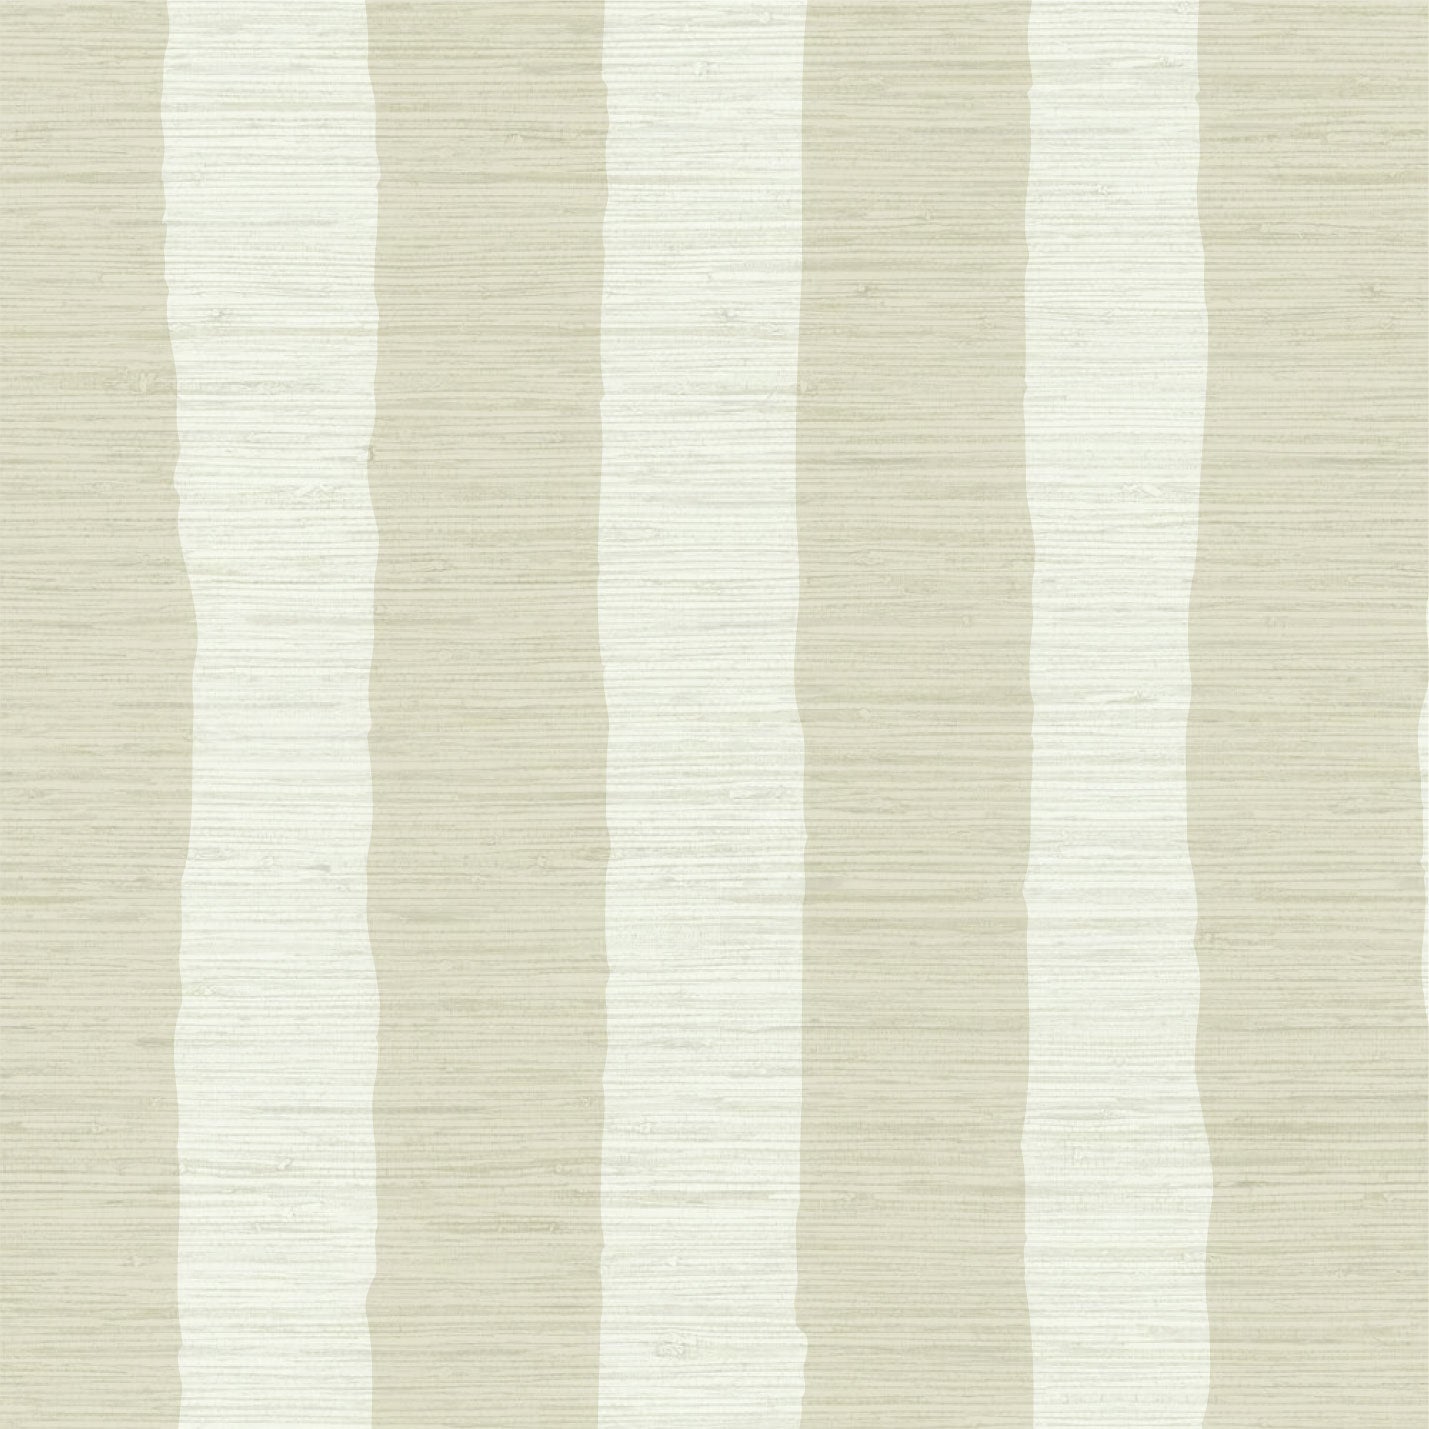 Load image into Gallery viewer, Grasscloth wallpaper Natural Textured Eco-Friendly Non-toxic High-quality  Sustainable Interior Design Bold Custom Tailor-made Retro chic Tropical Jungle Coastal preppy Garden Seaside Coastal Seashore Waterfront Vacation home styling Retreat Relaxed beach vibes Beach cottage Shoreline Oceanfront Nautical wide vertical stripe cabana white cream neutral off-white sand tan beige
